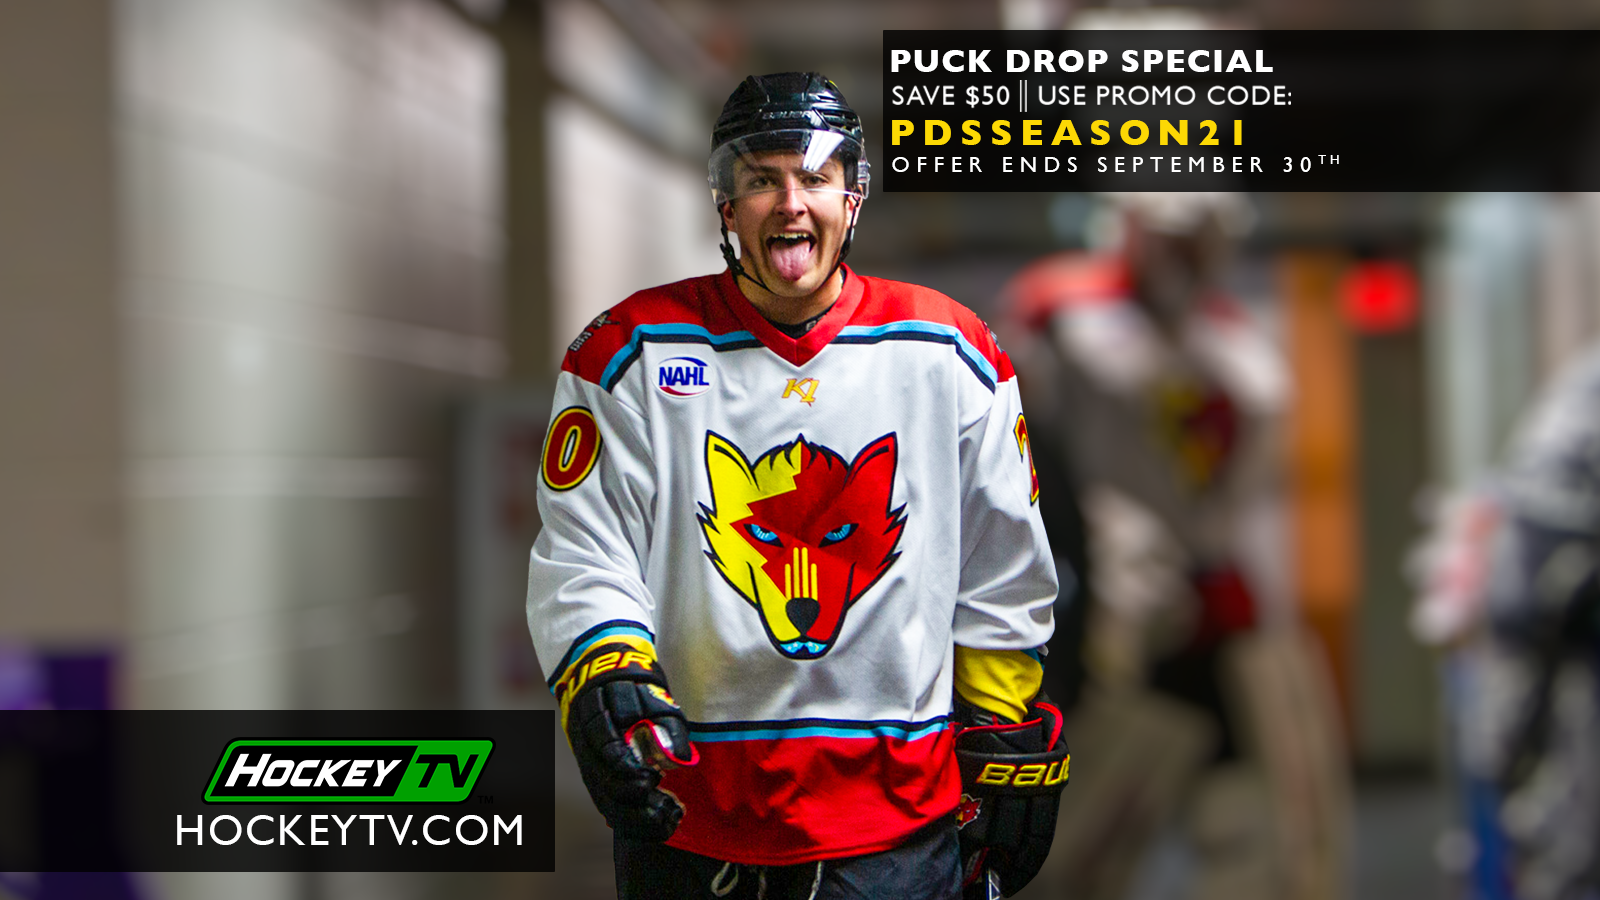 Puck Drop Special Now Available!